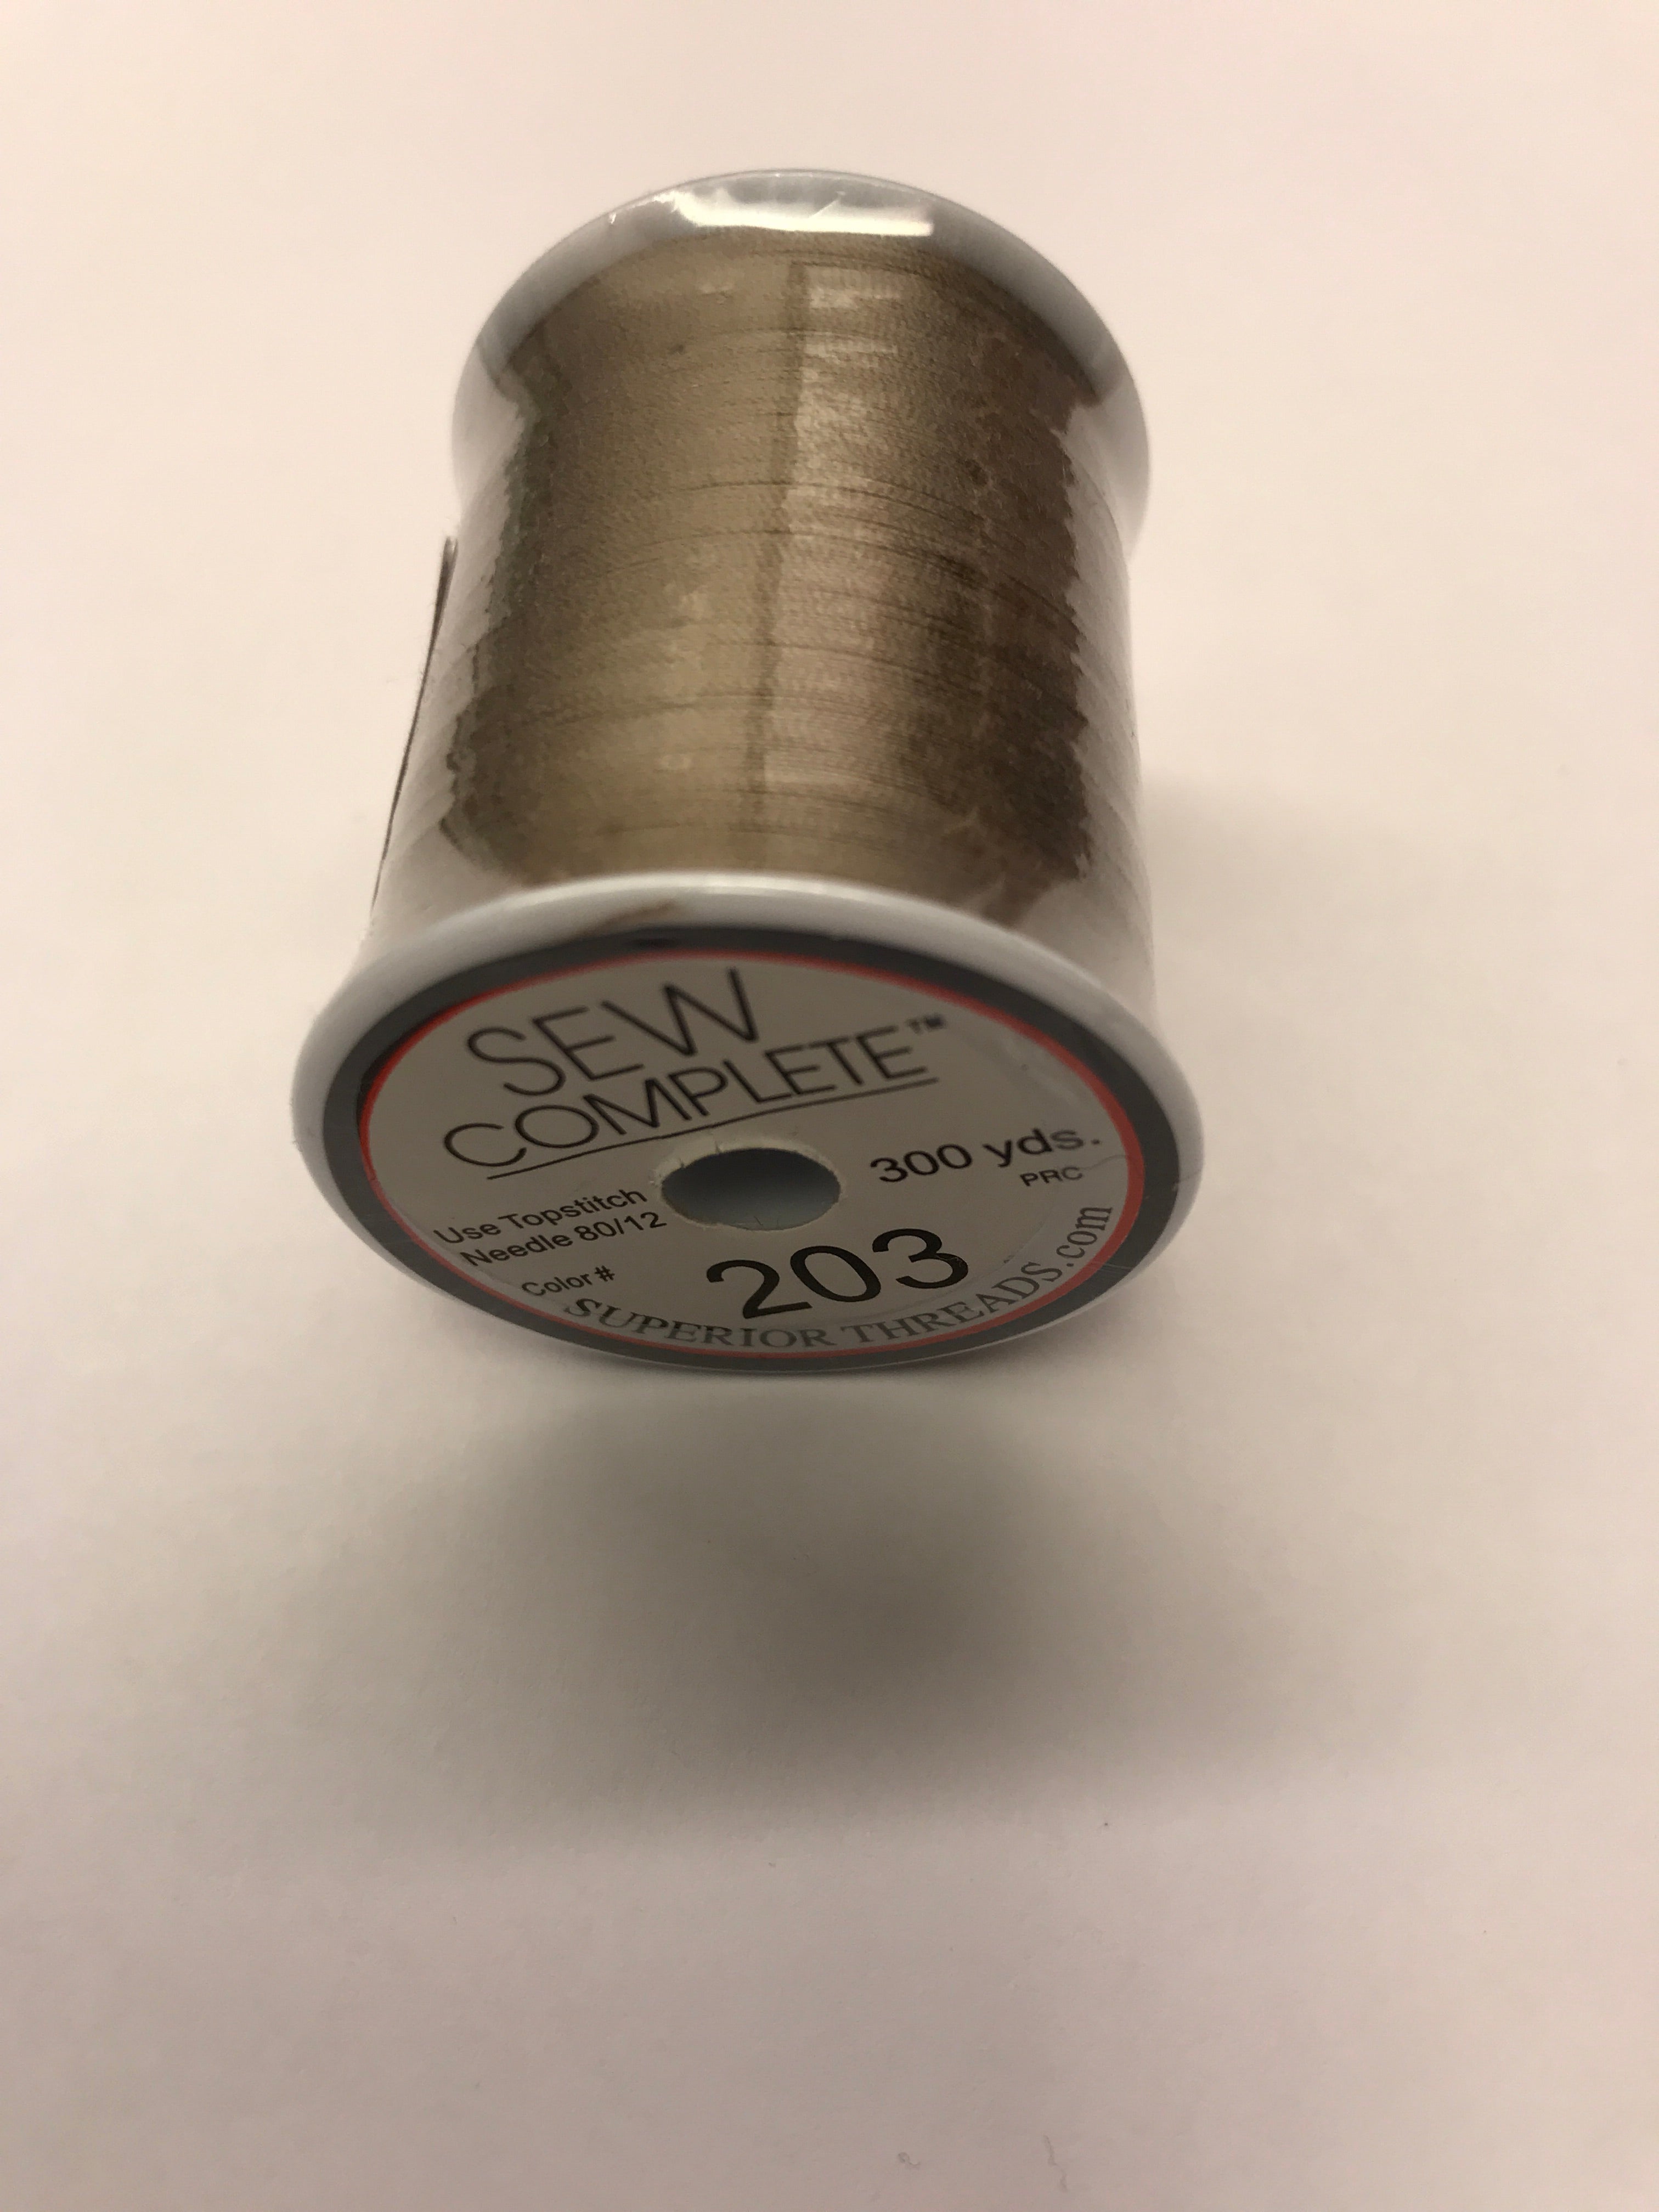 Sew Complete Polyester 50 wt Thread - 203 - Neutral Collection